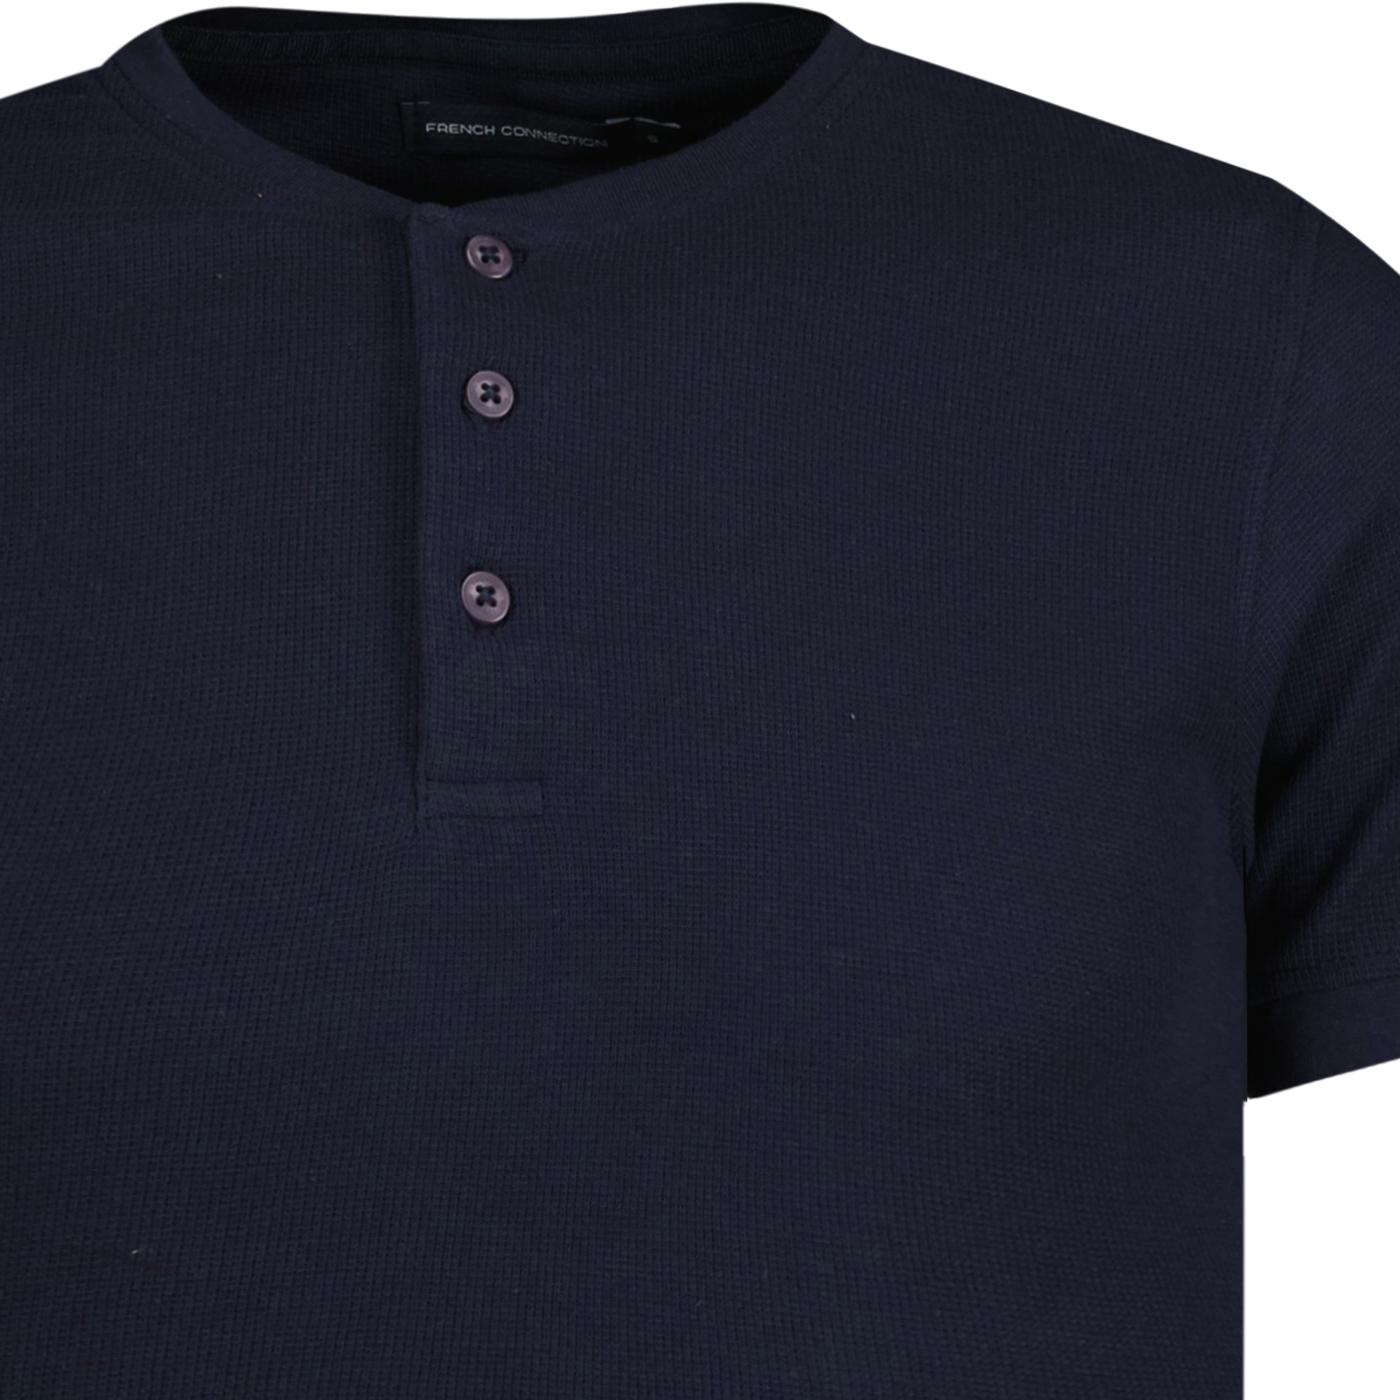 French Connection Retro 60s Pique Micro Henley Tee in Marine